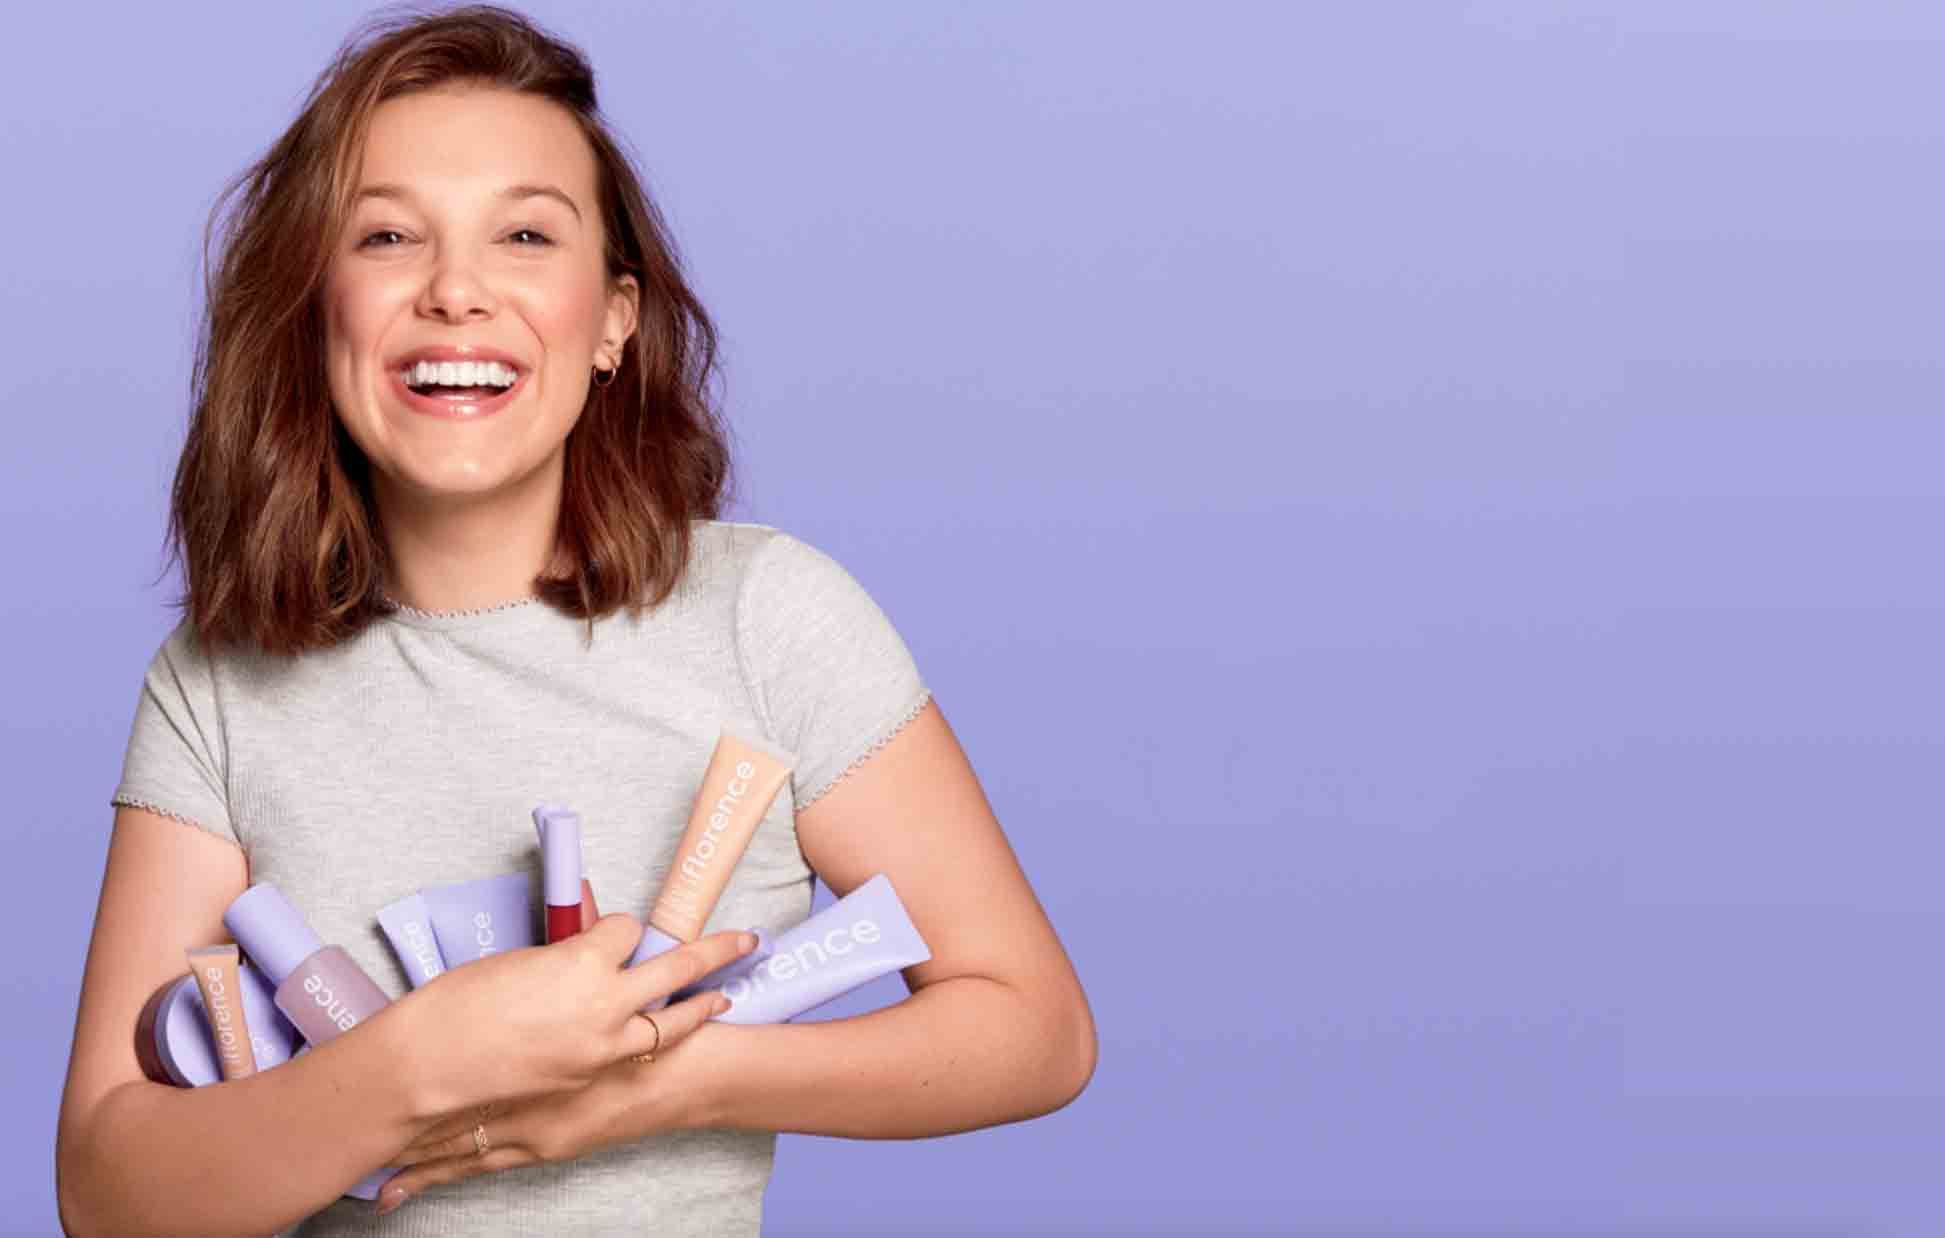 Millie Bobby Brown's launched makeup and skincare line Florence by